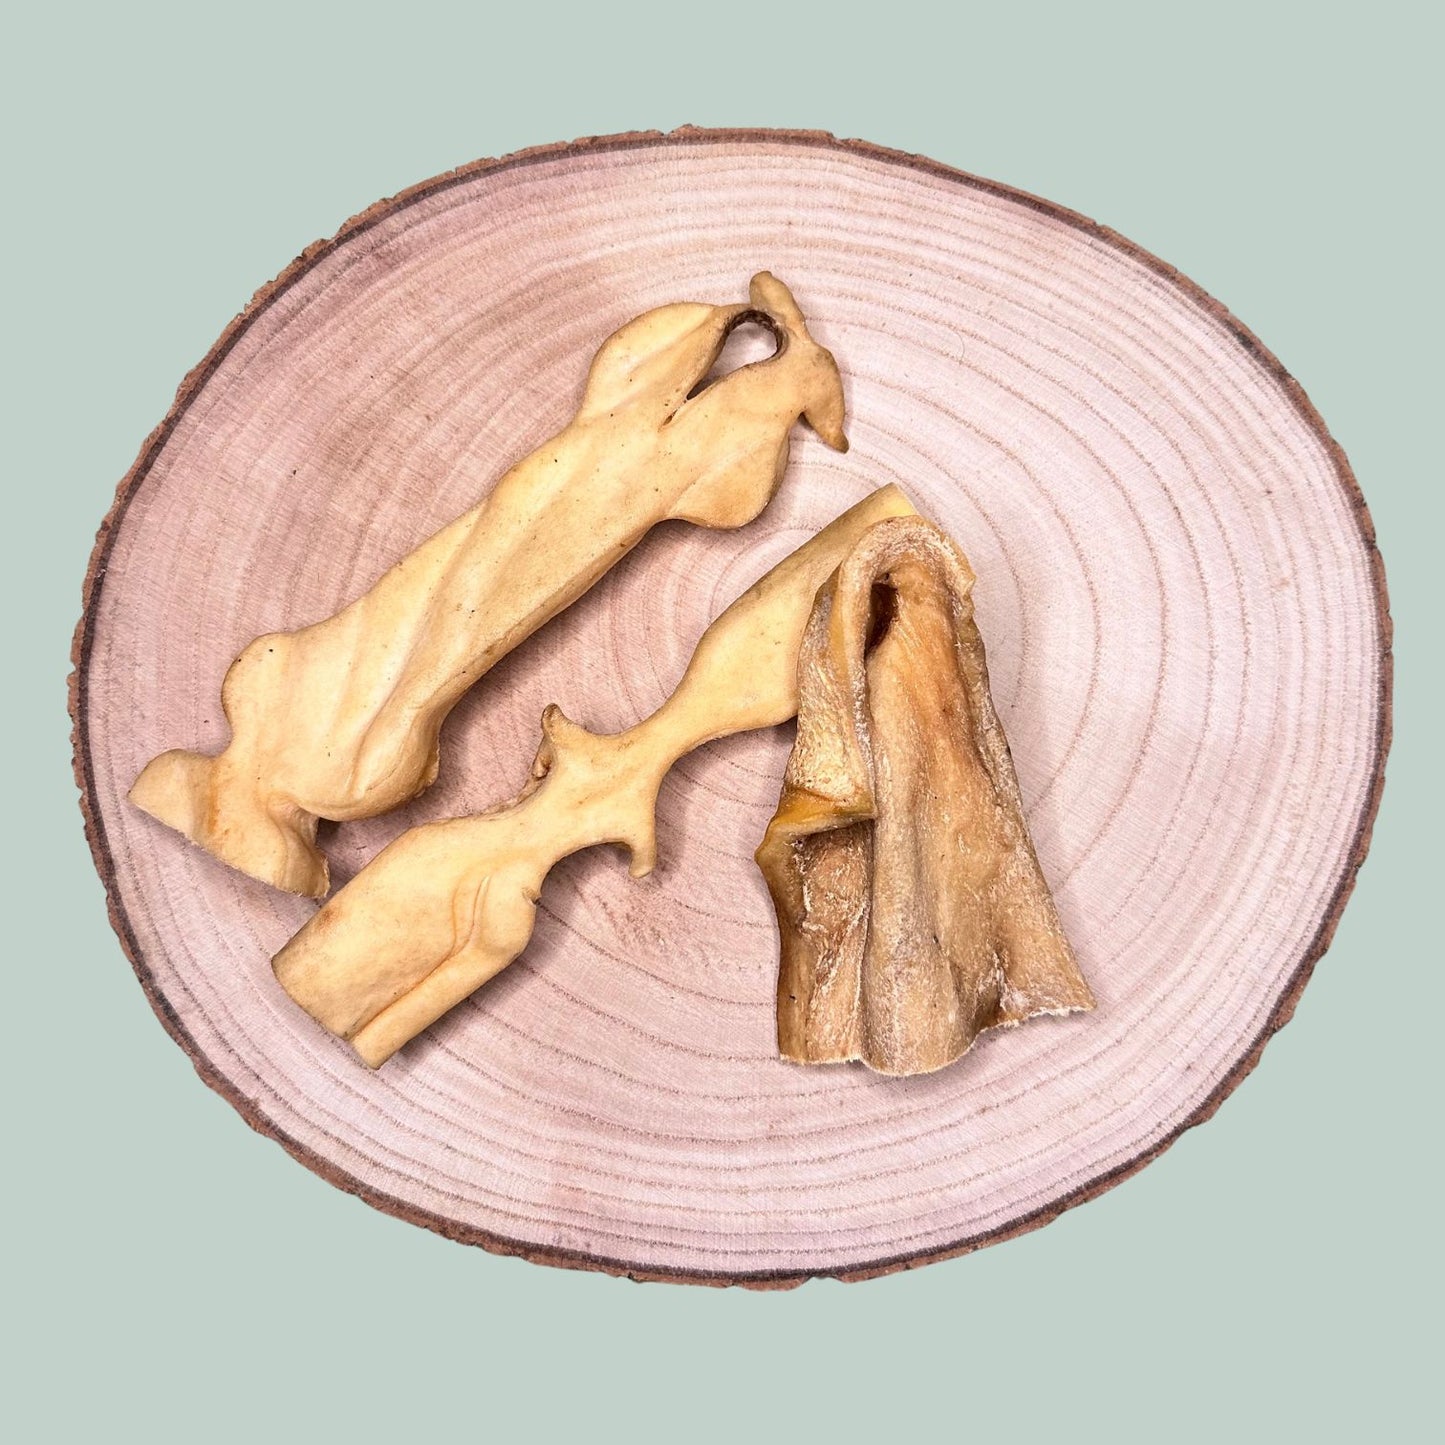 Dried beef scalp and head meat natural treat and chew for dogs and puppies